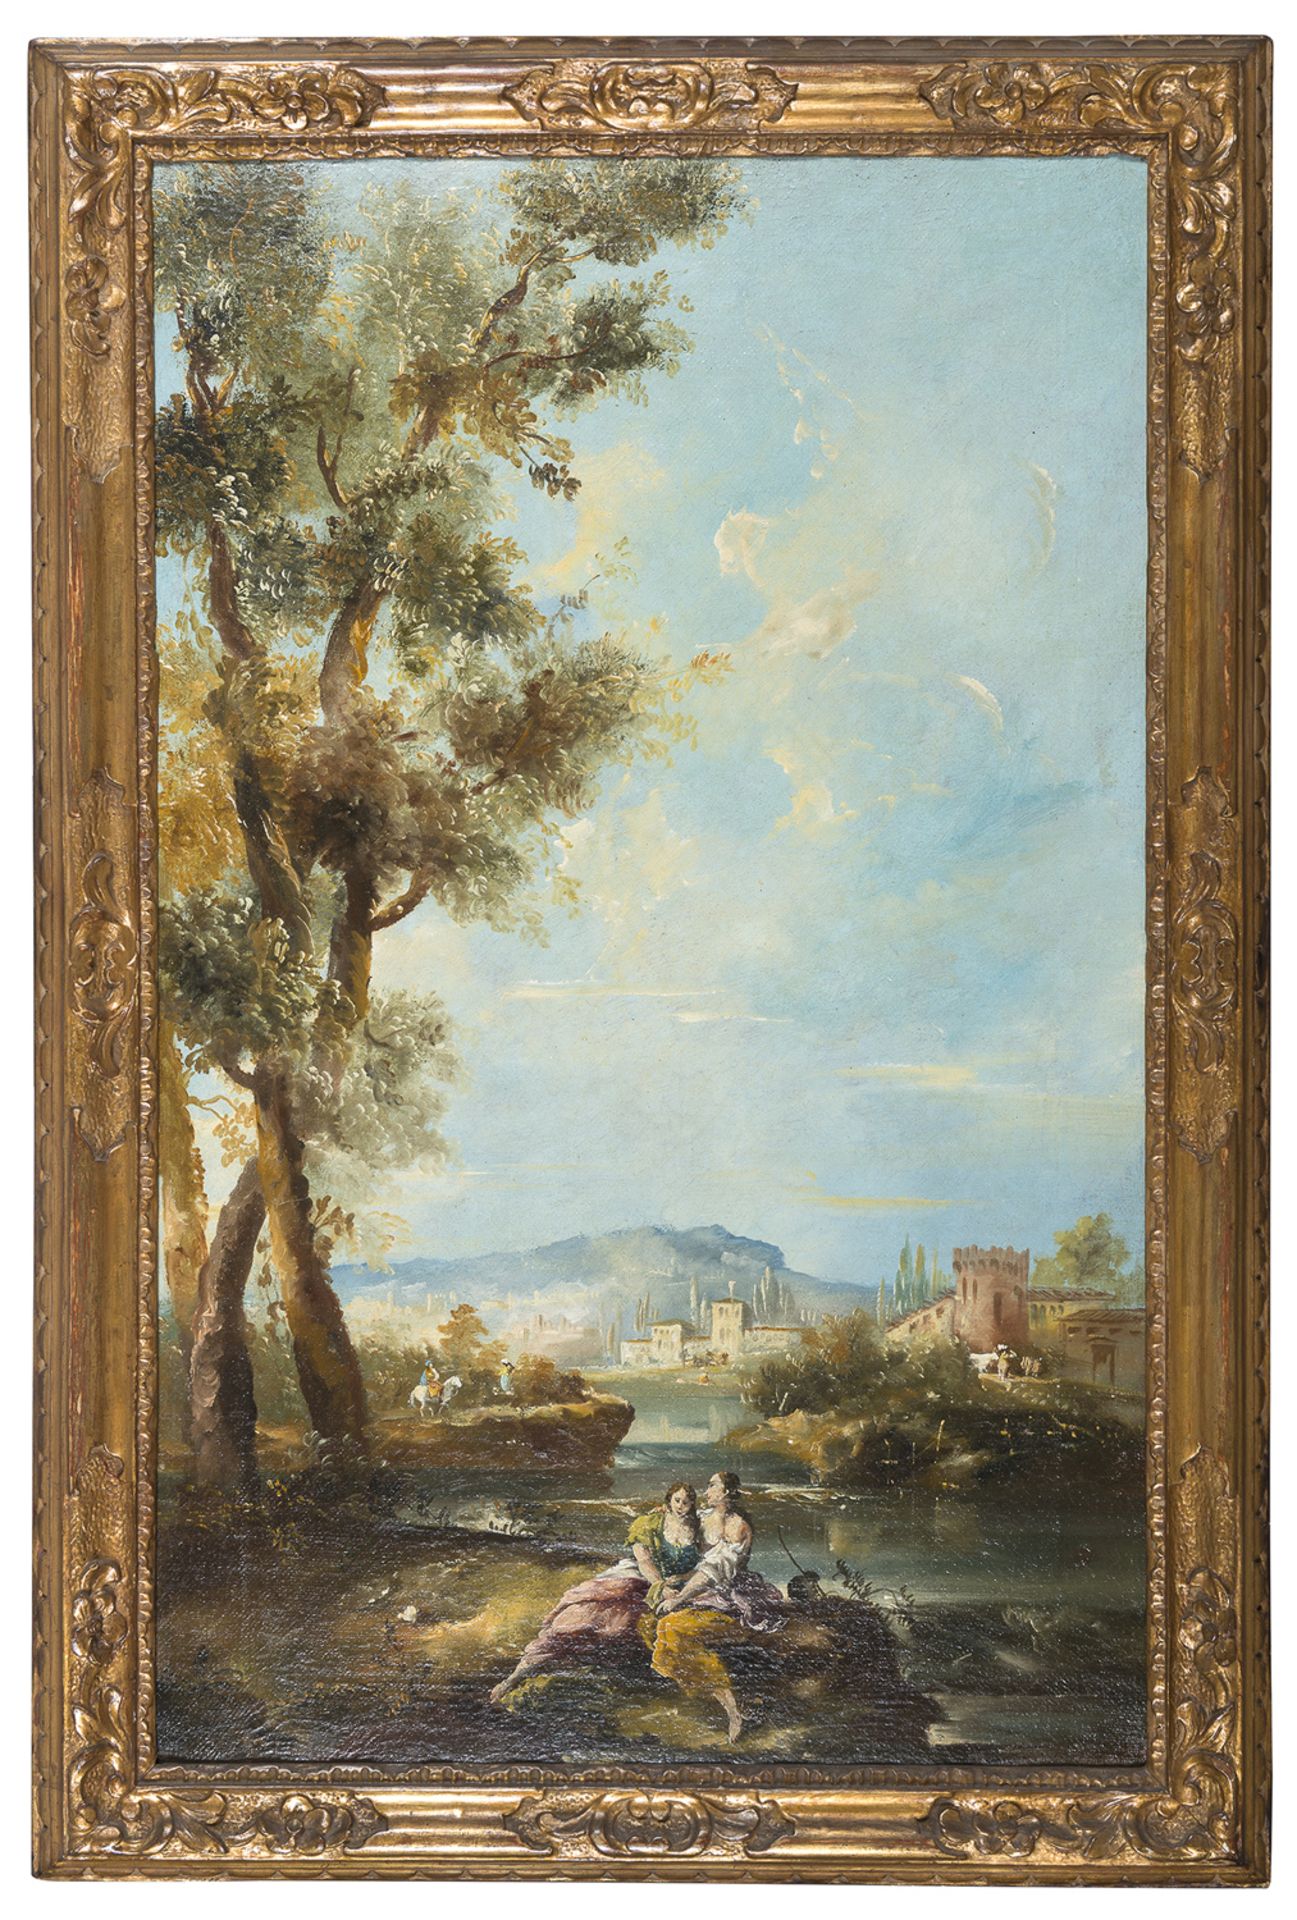 20TH CENTURY OIL PAINTED LANDSCAPE IN 18TH CENTURY STYLE